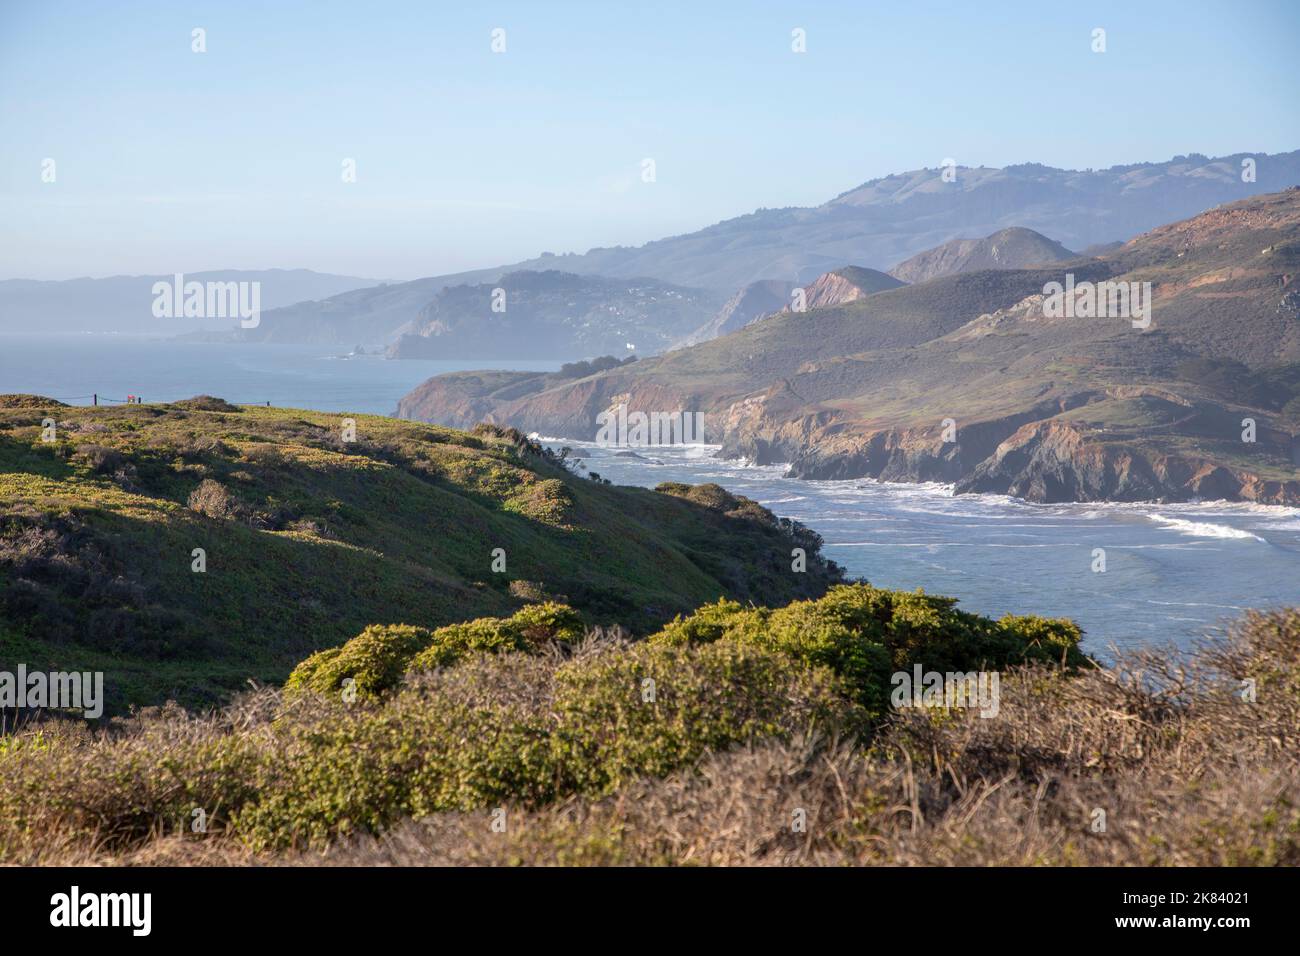 Marin Headlands is a beautiful natural area in the coastal peninsula of Marin County, California. It sits across the Golden Gate from San Francisco. Stock Photo